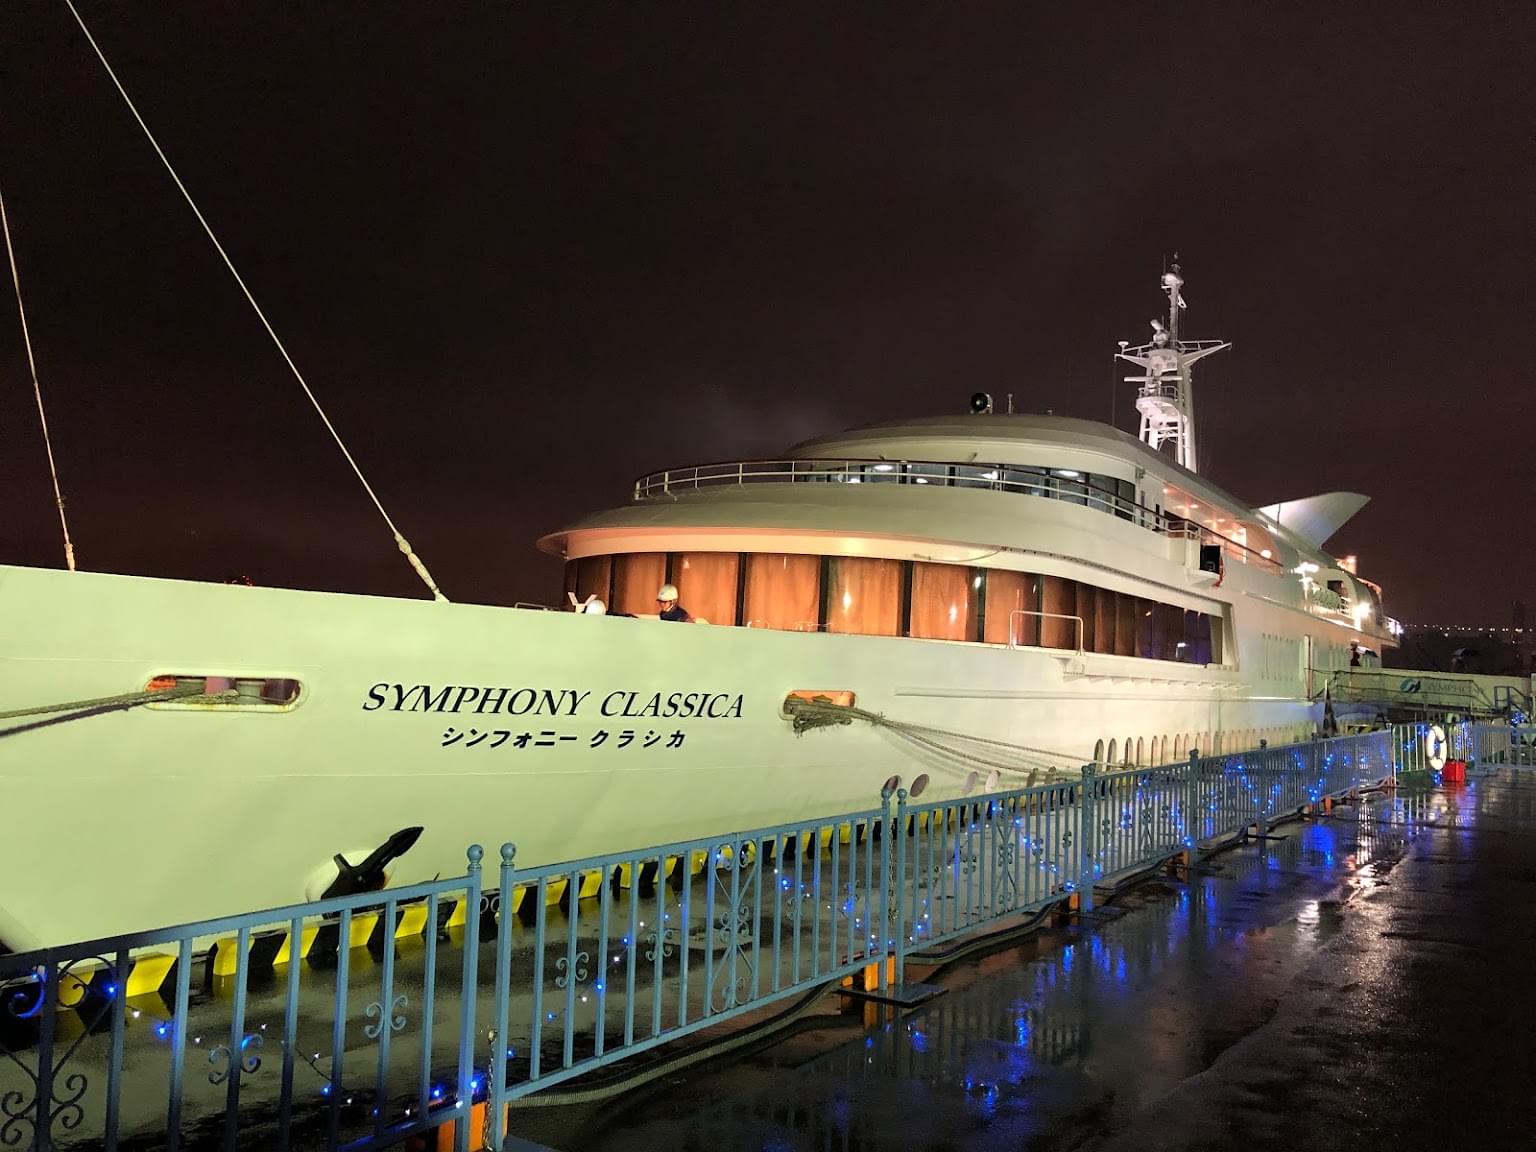 Embark on the Symphony sunset cruise in tokyo